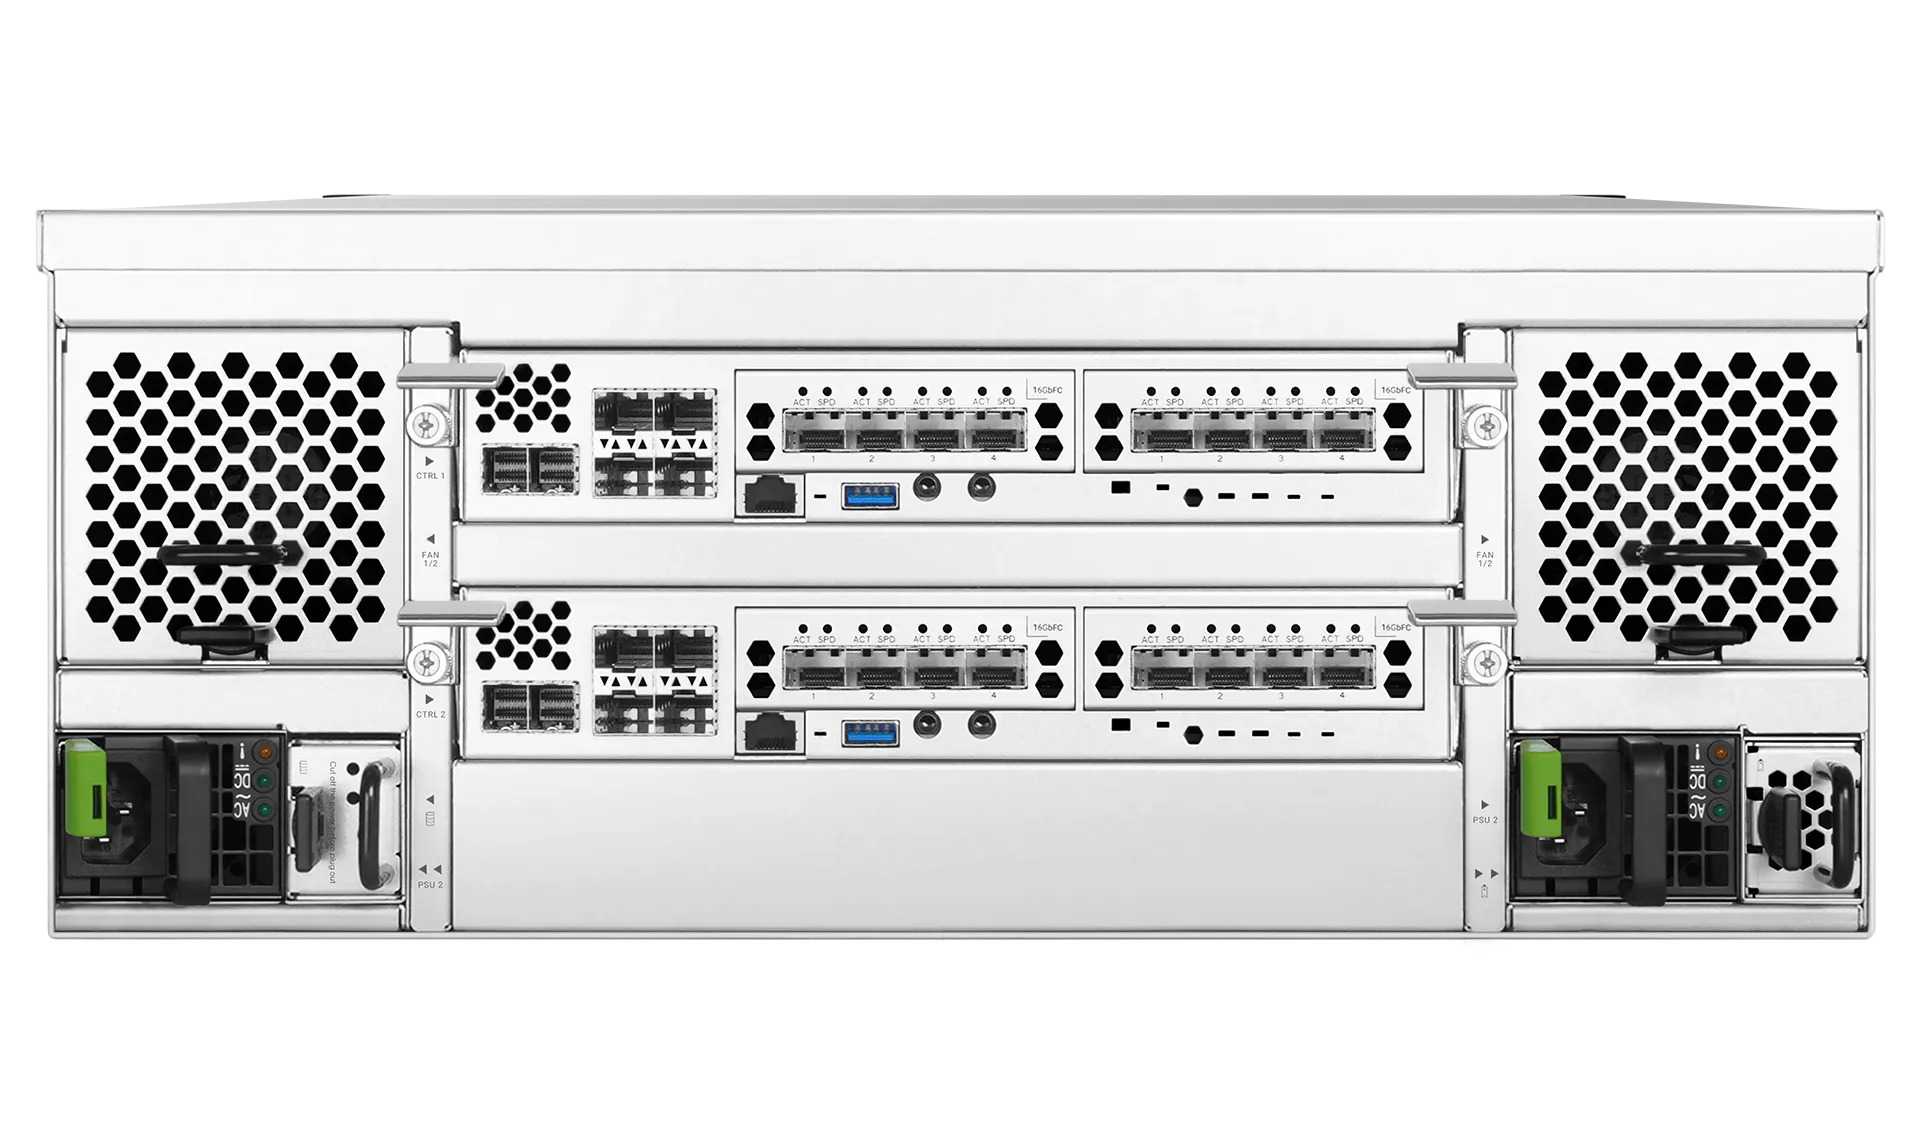 XS5324 | Performance, Capacity for Mixed Workloads | QSAN